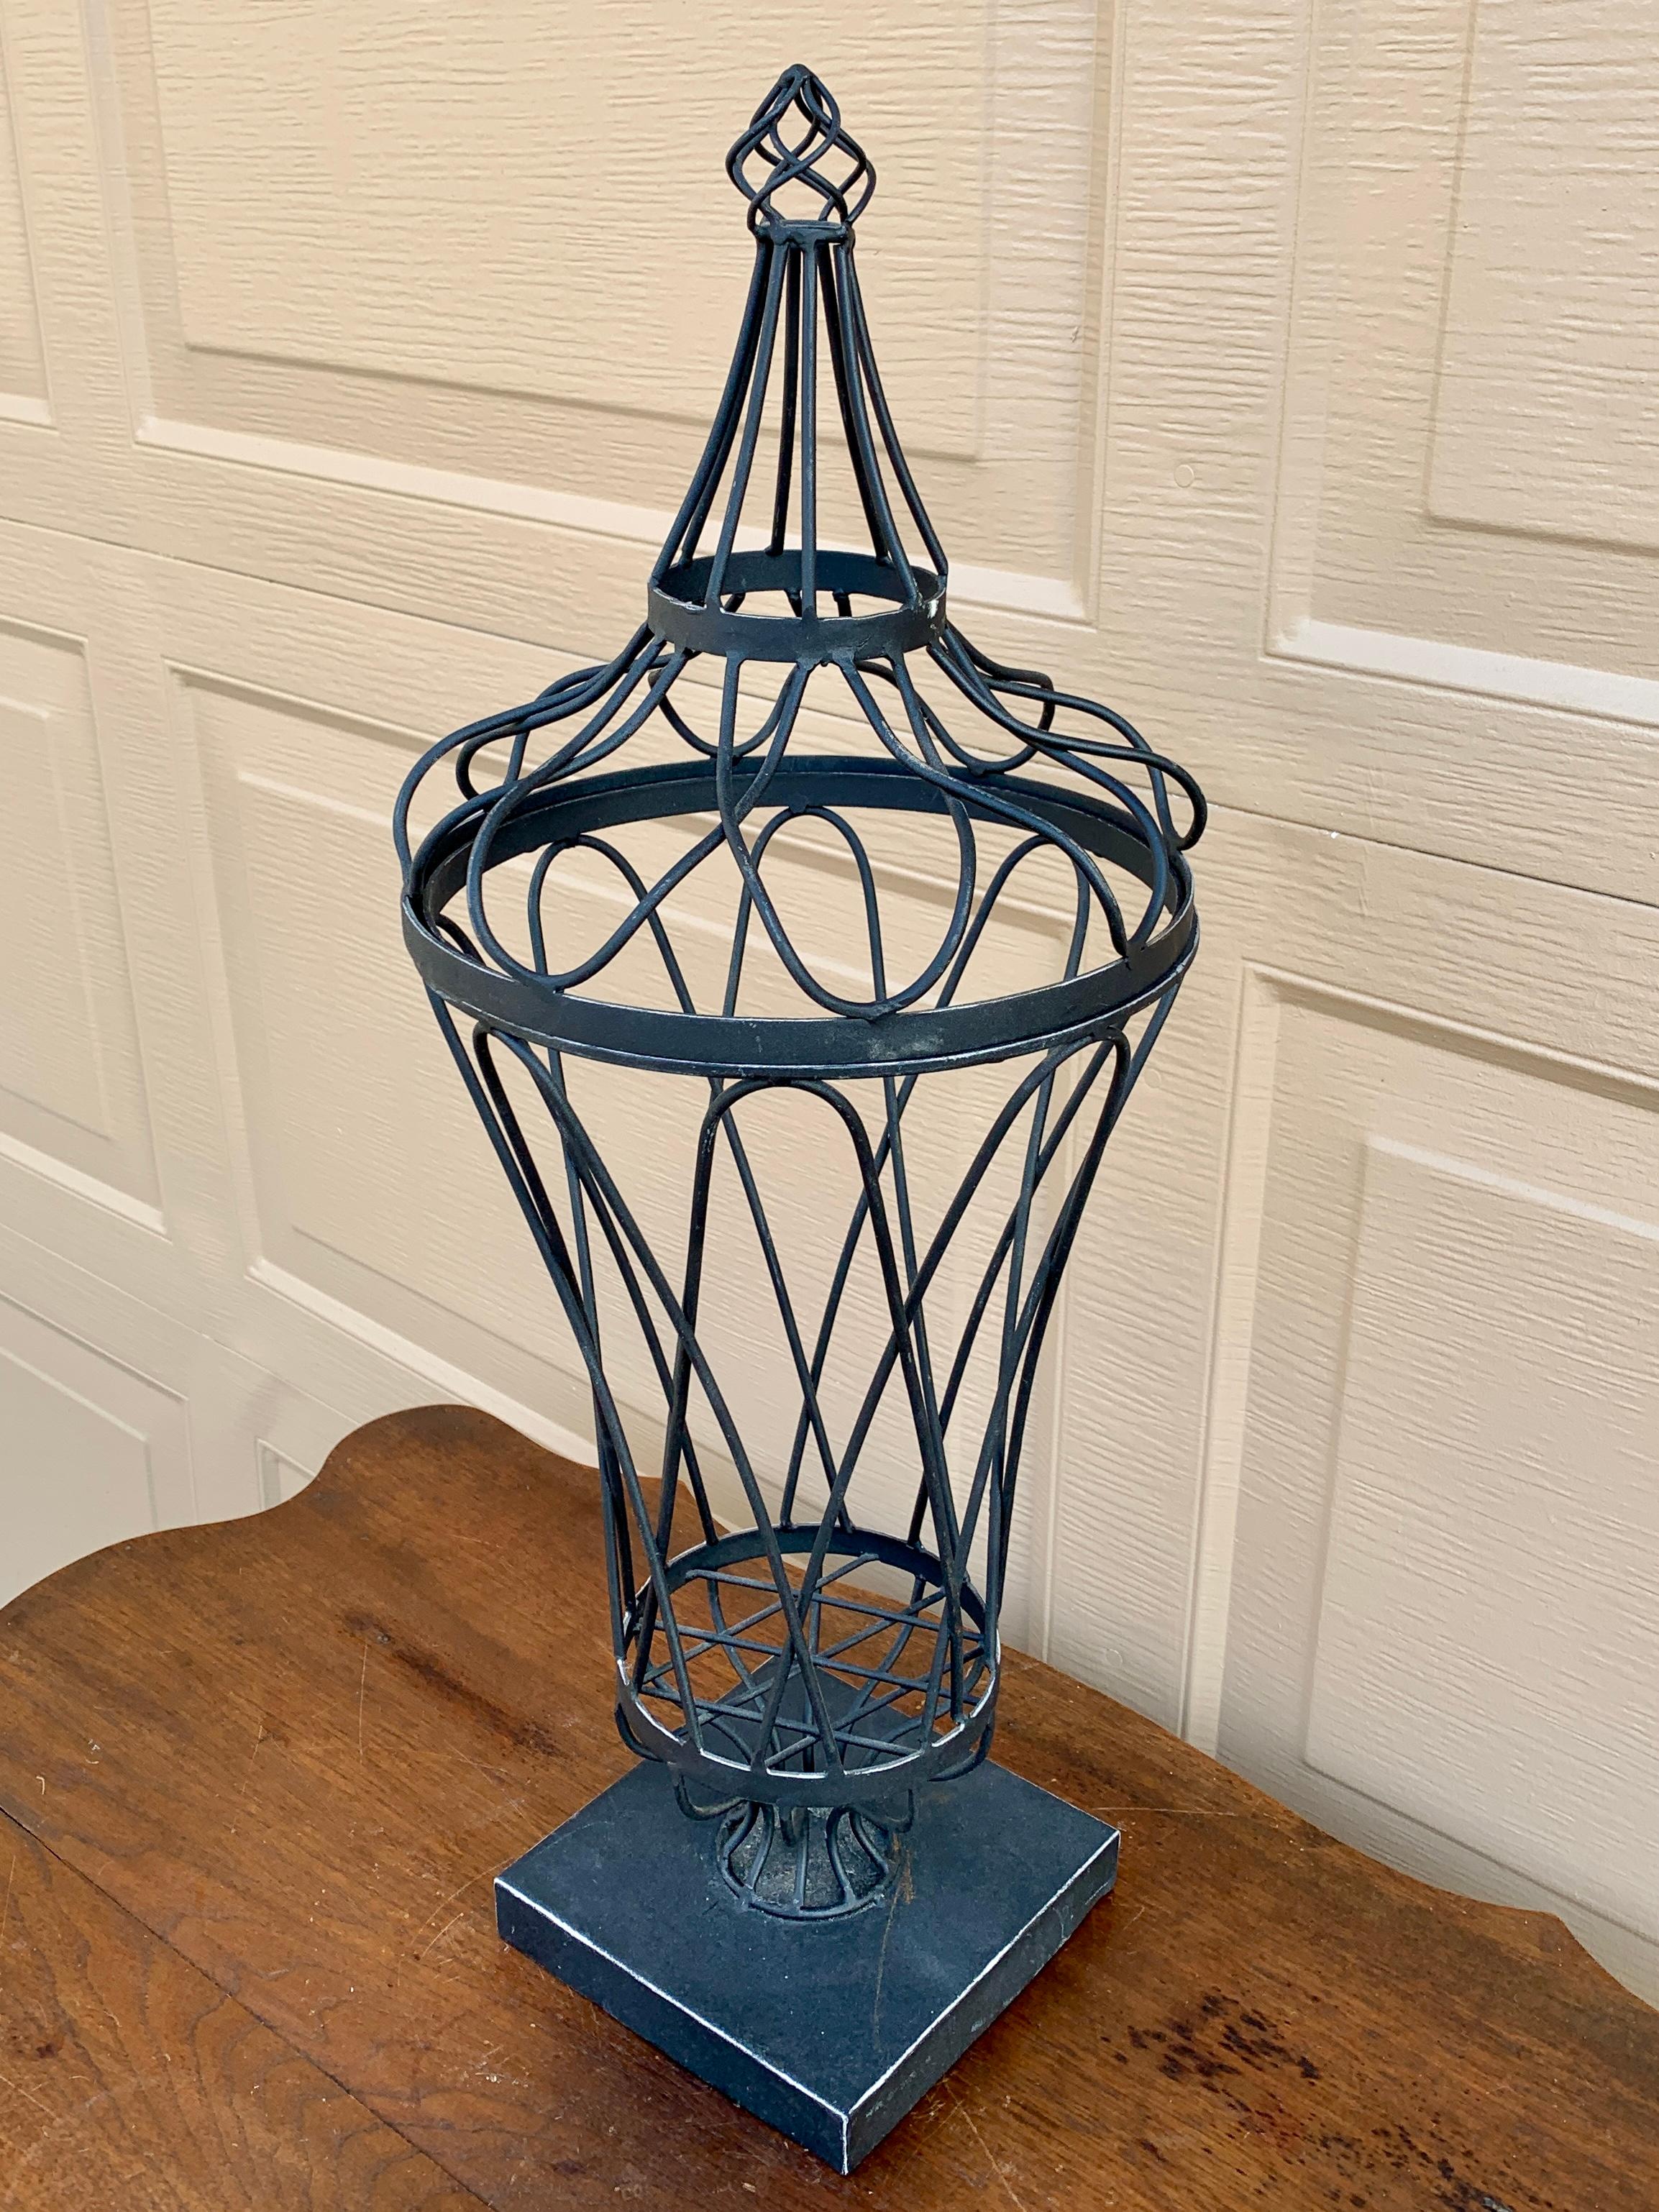 French Provincial Wrought Iron Topiary Urn Form For Sale